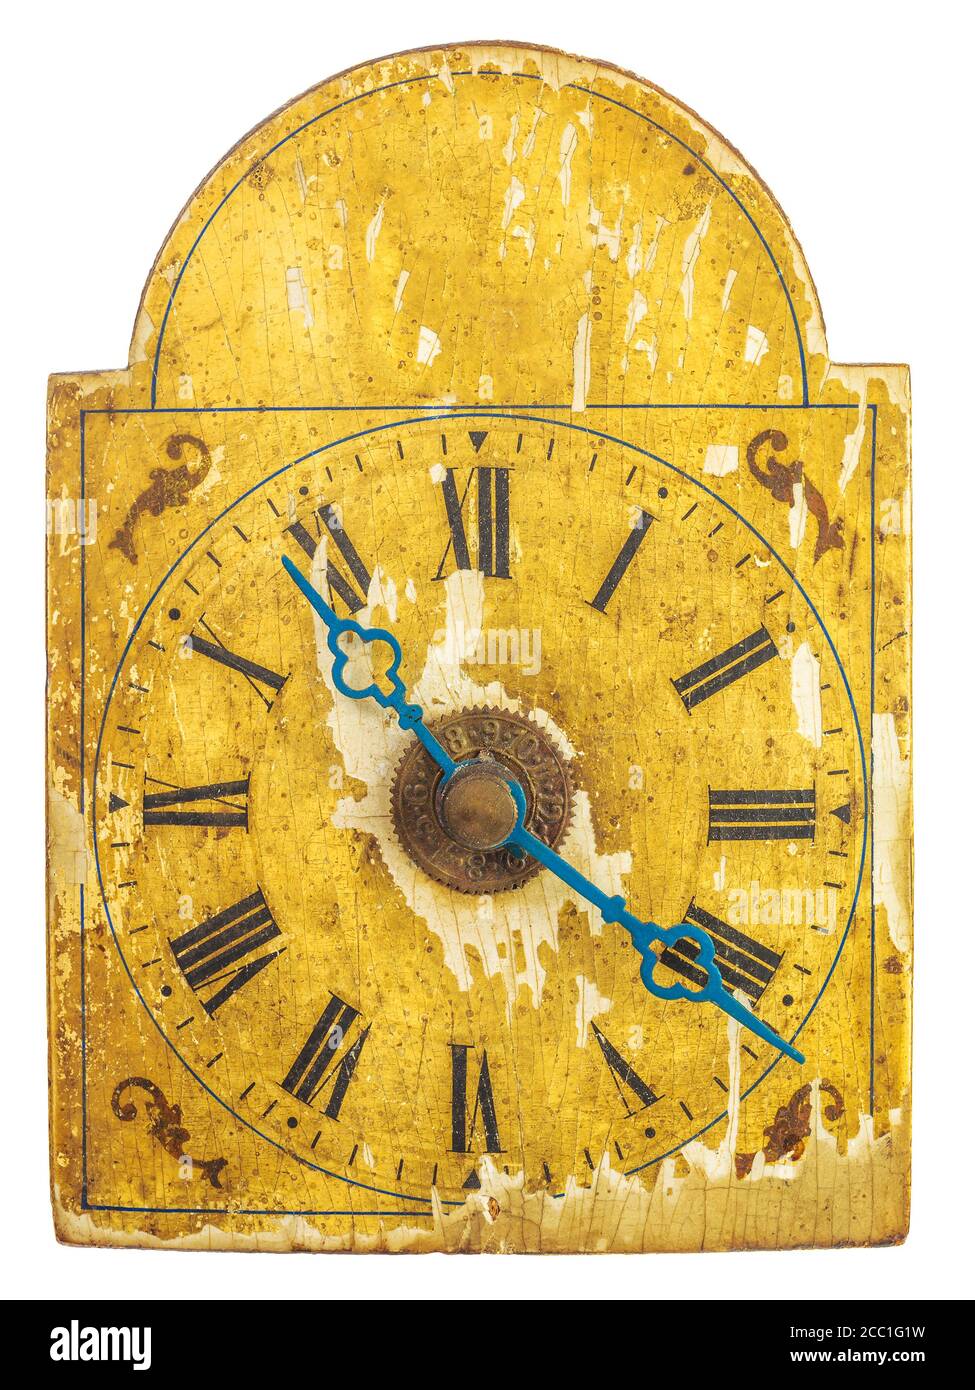 Genuine ornamental seventeenth century clock with blue hour and minute hands isolated on a white background Stock Photo